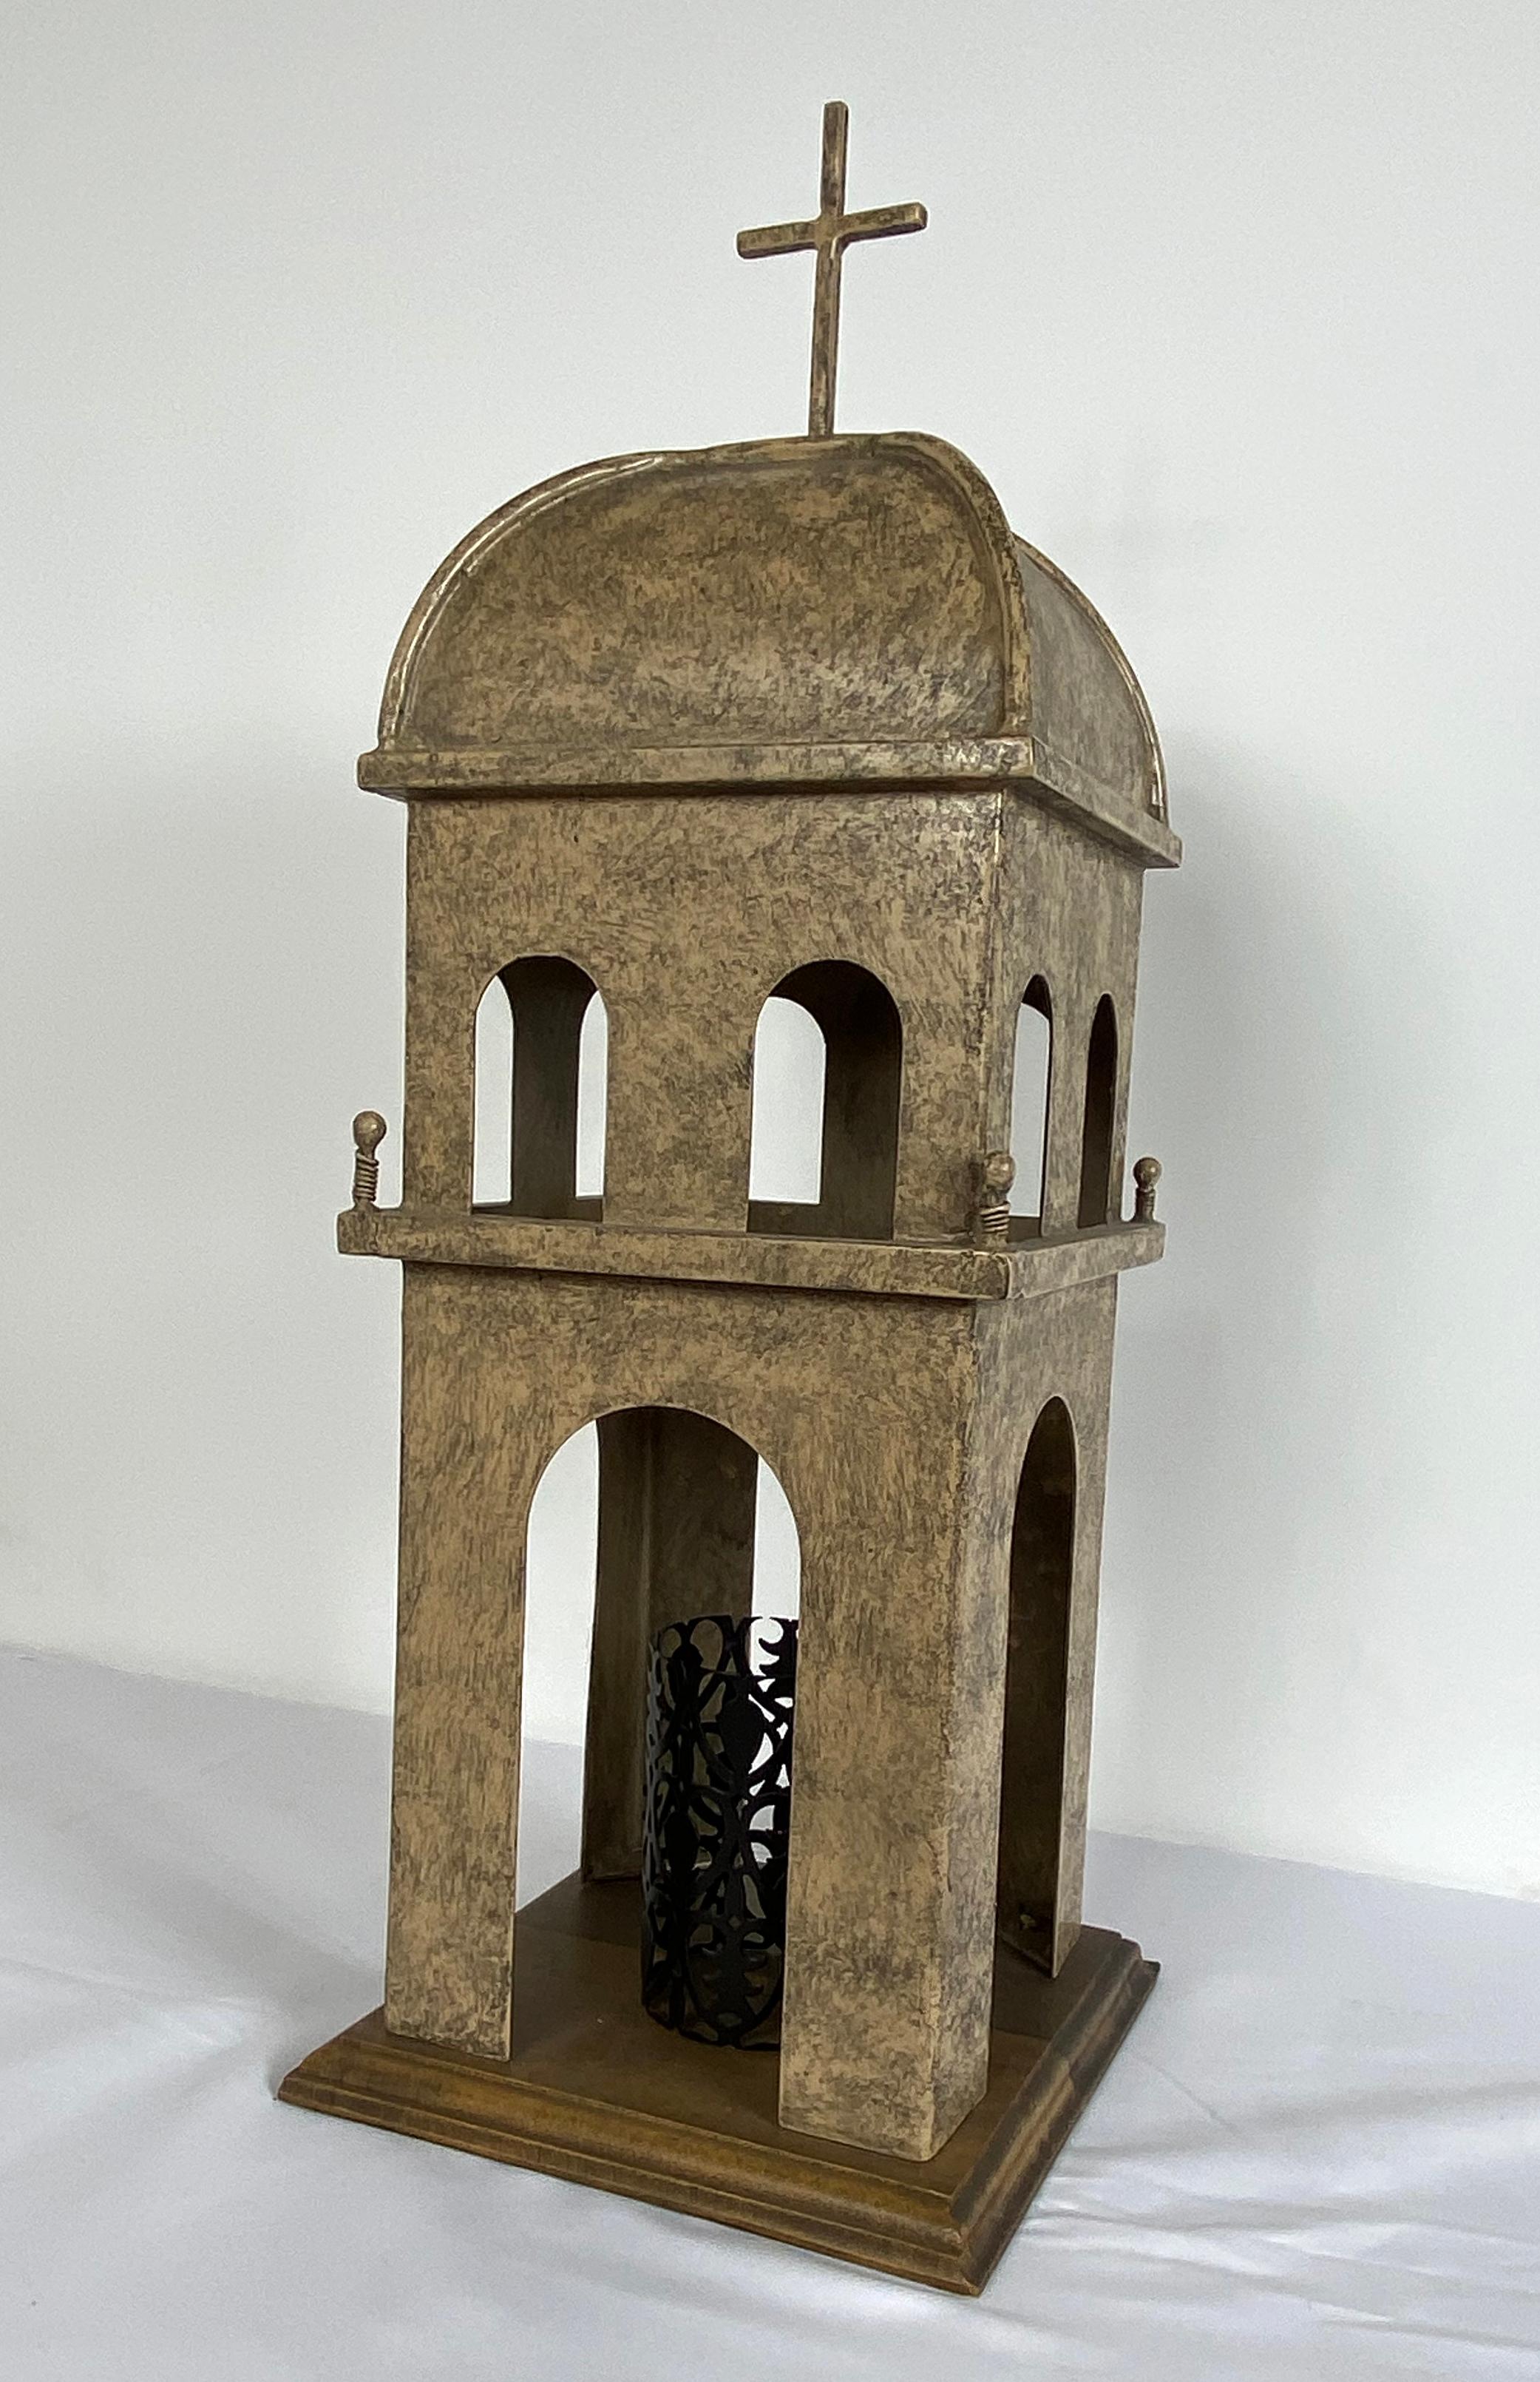 This charming heavy iron candle house was made as a table centerpiece for a Private Prep School. It was designed to look like the school icon, the tower at the entry of the school.   It has a wood base and special finish to resemble adobe bricks. 